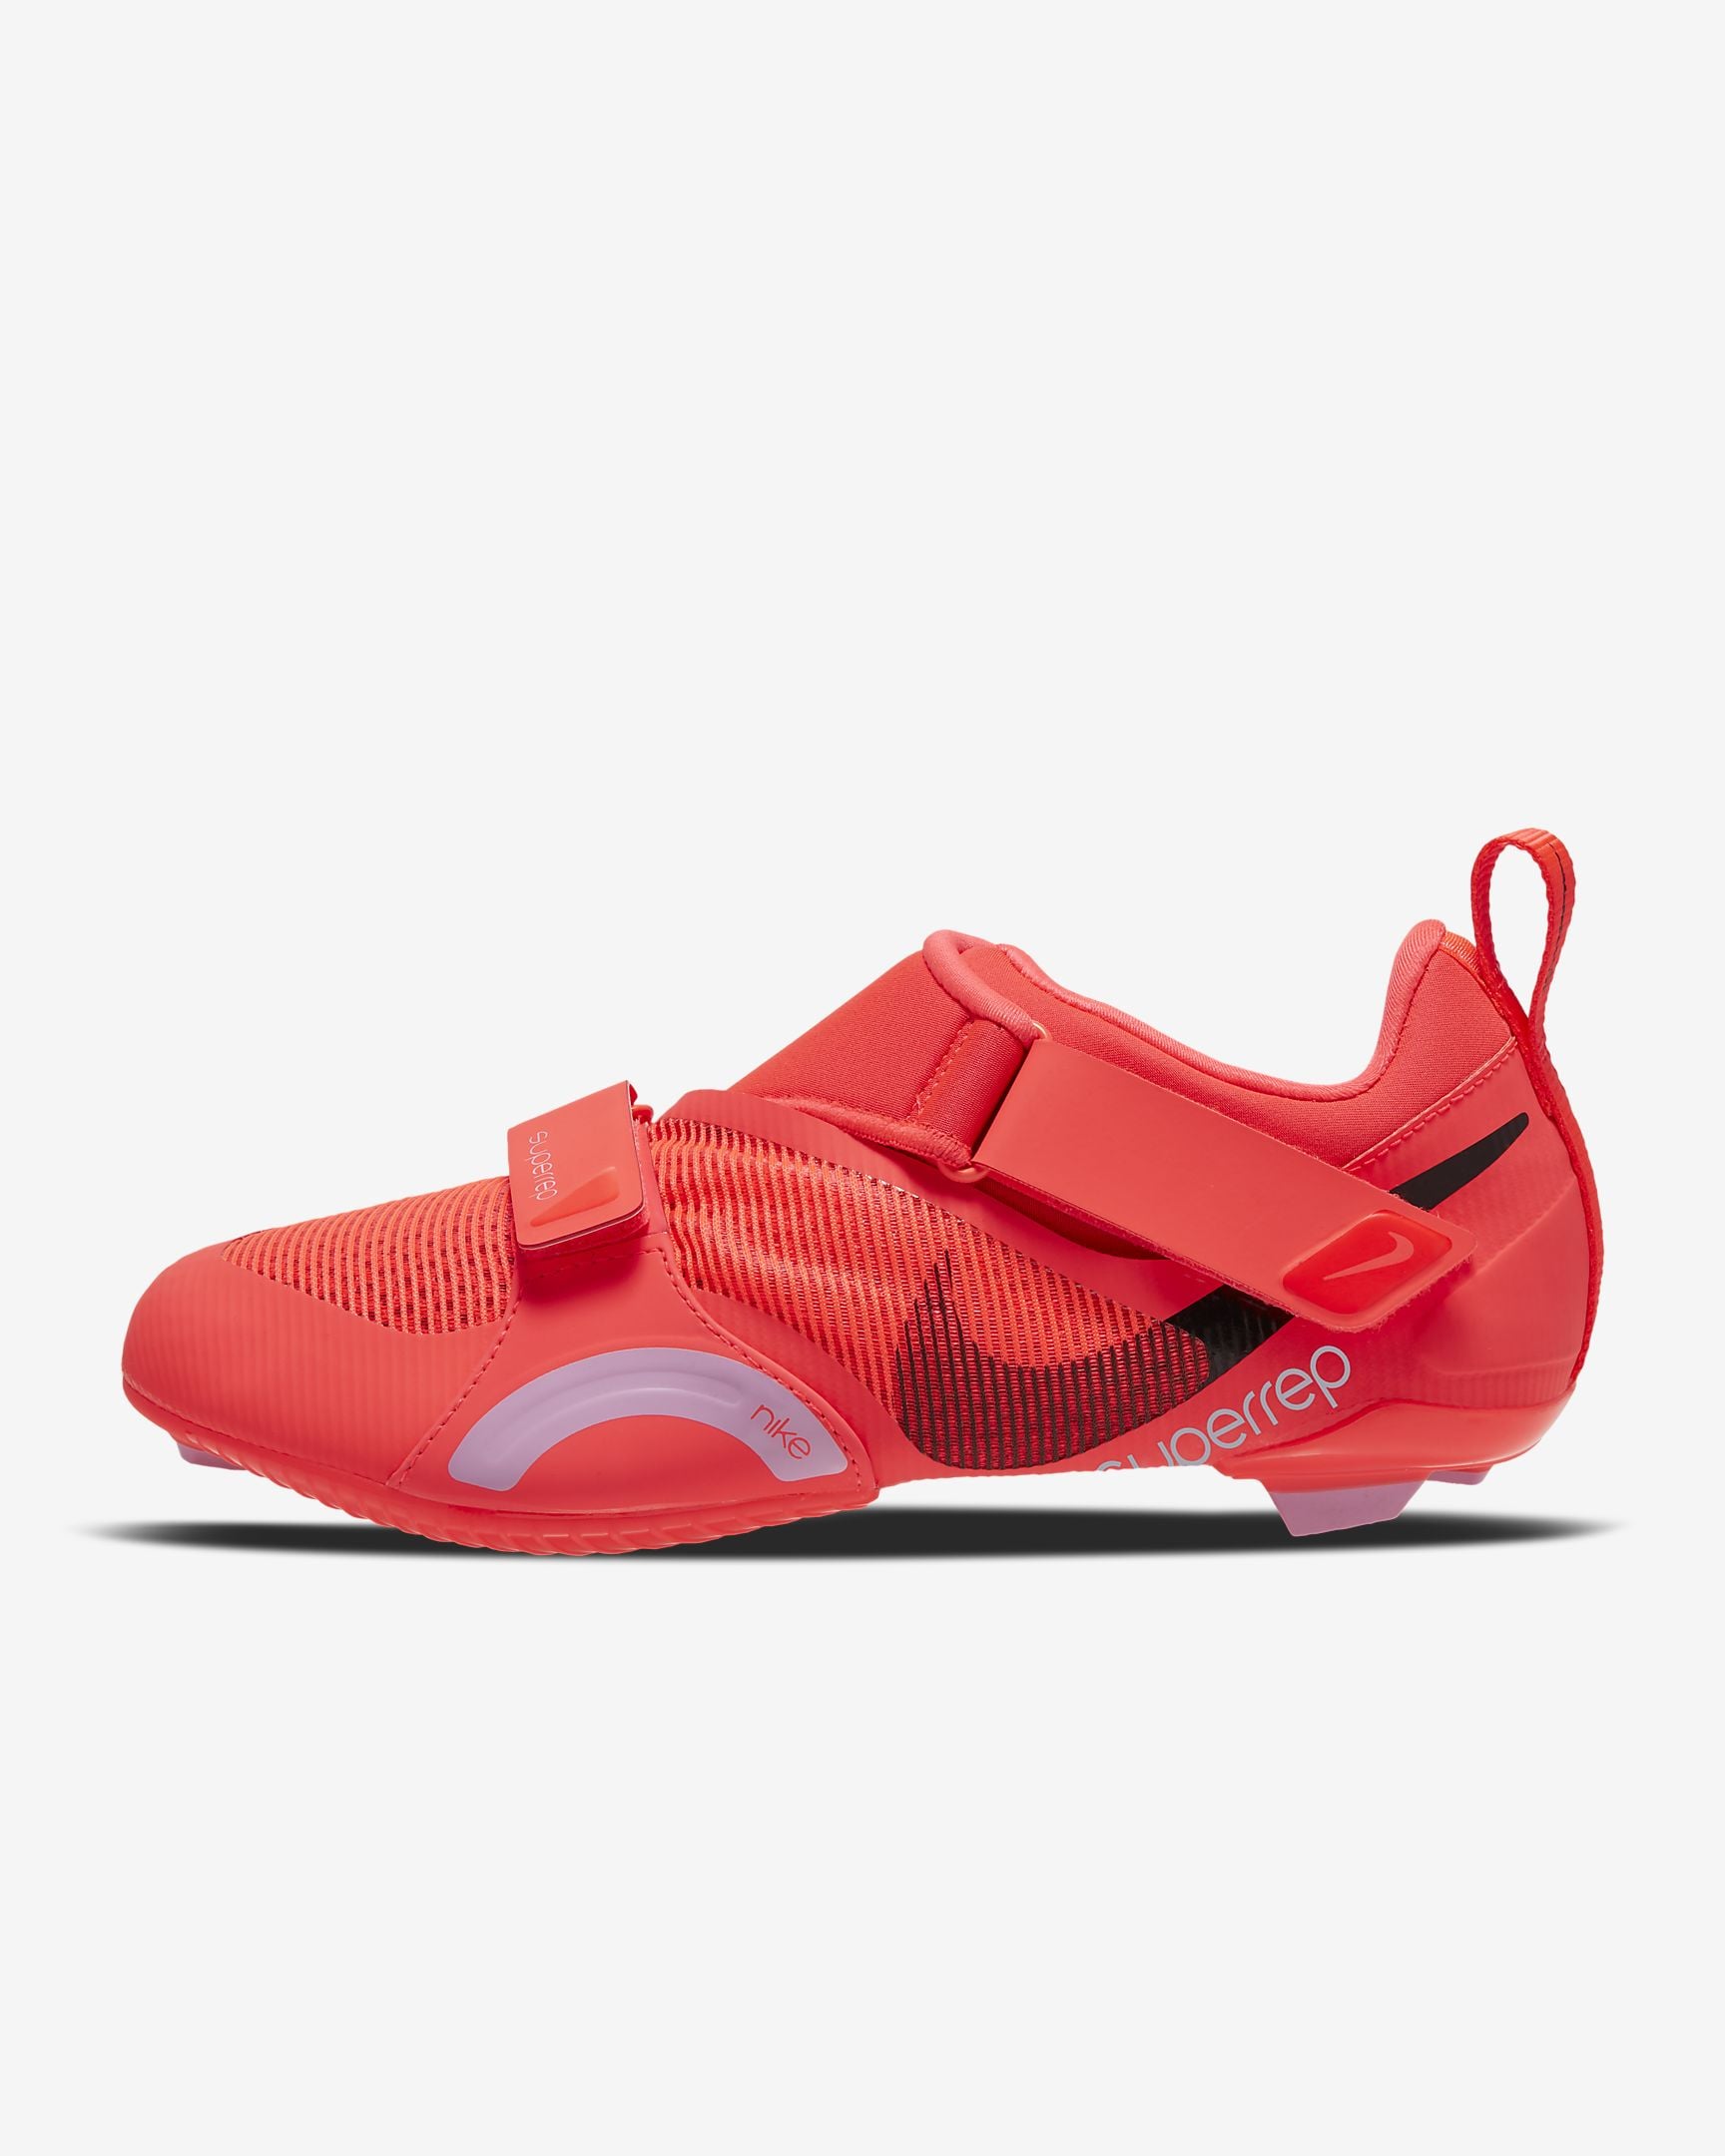 Oral Comercio Regulación Nike SuperRep Cycle Shoe in Flash Crimson | Fitness-Lovers Are Going to Be  Obsessed With These Nike Indoor Cycling Shoes | POPSUGAR Fitness Photo 3